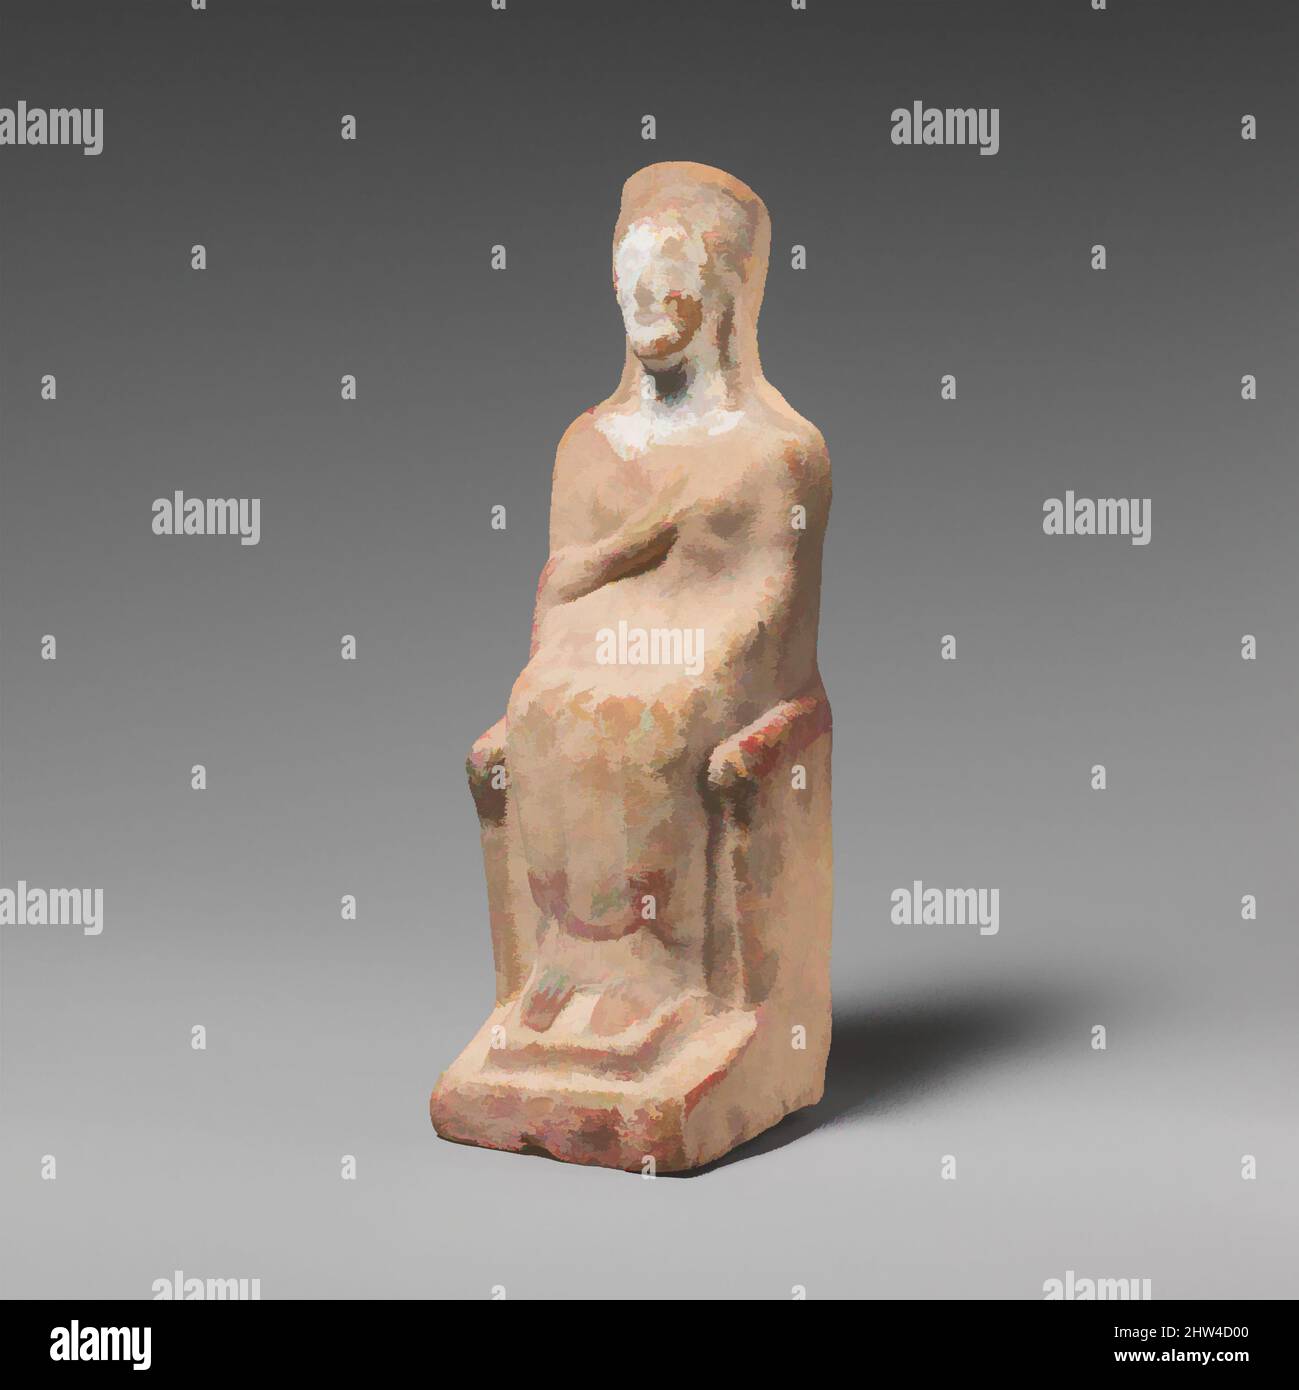 Art inspired by Terracotta statuette of a seated woman, Late Archaic, early 5th century B.C., Greek, Attic, Terracotta, H. 7 15/16 in. (20.2 cm), Terracottas, Classic works modernized by Artotop with a splash of modernity. Shapes, color and value, eye-catching visual impact on art. Emotions through freedom of artworks in a contemporary way. A timeless message pursuing a wildly creative new direction. Artists turning to the digital medium and creating the Artotop NFT Stock Photo